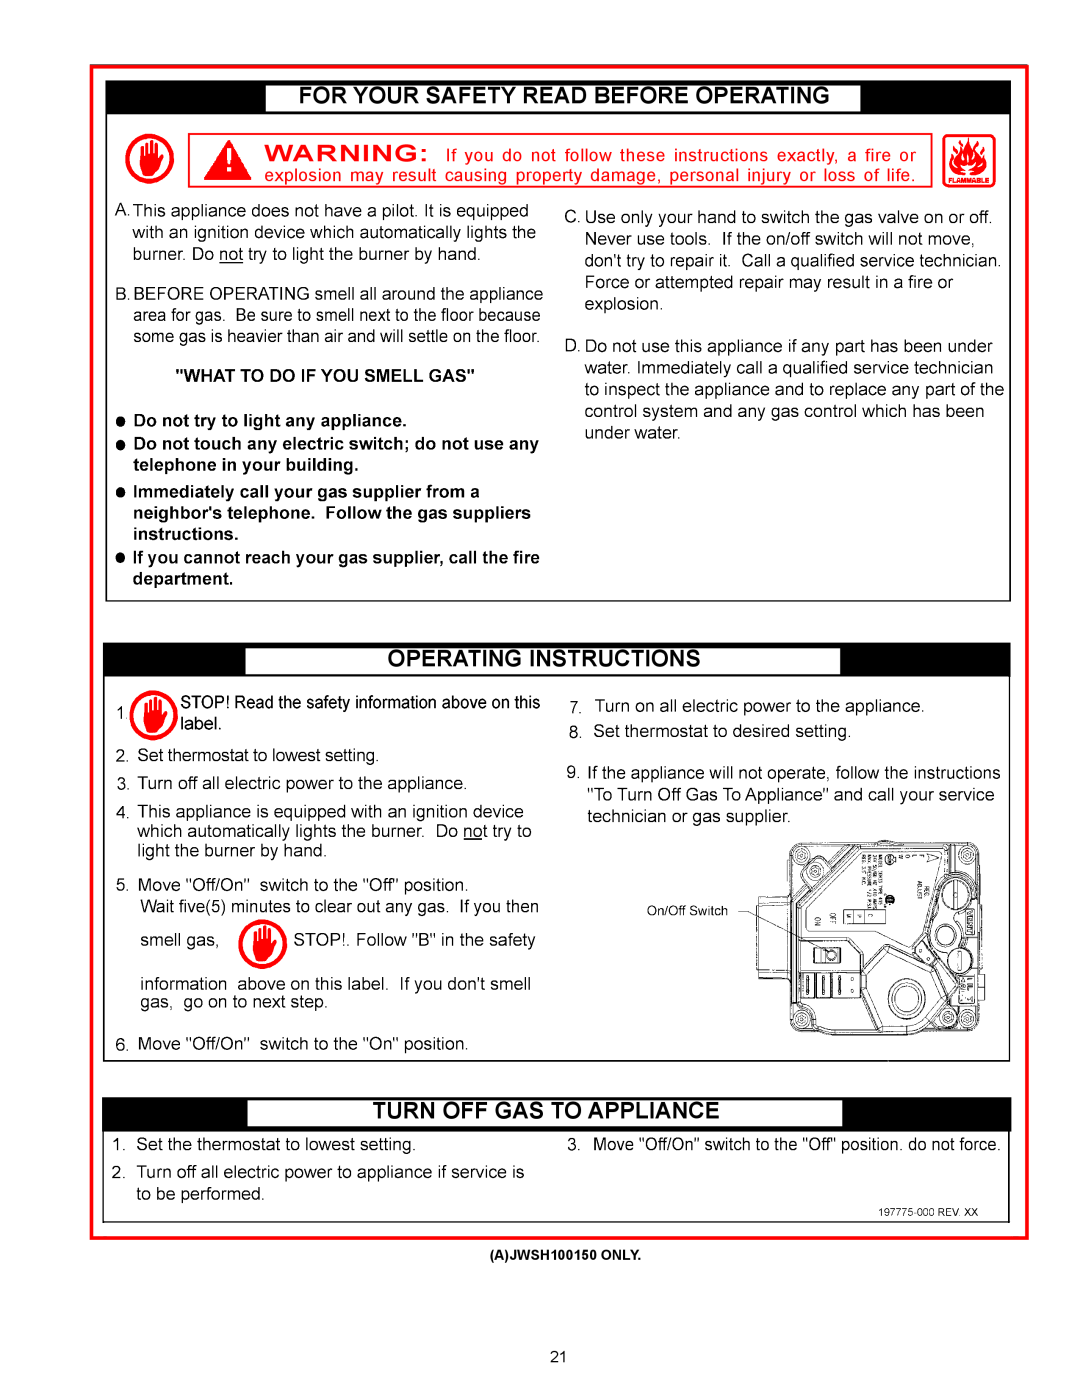 Ferguson JWSH100150, JWSH100250 For Your Safety Read Before Operating, Operating Instructions Turn Off Gas To Appliance 